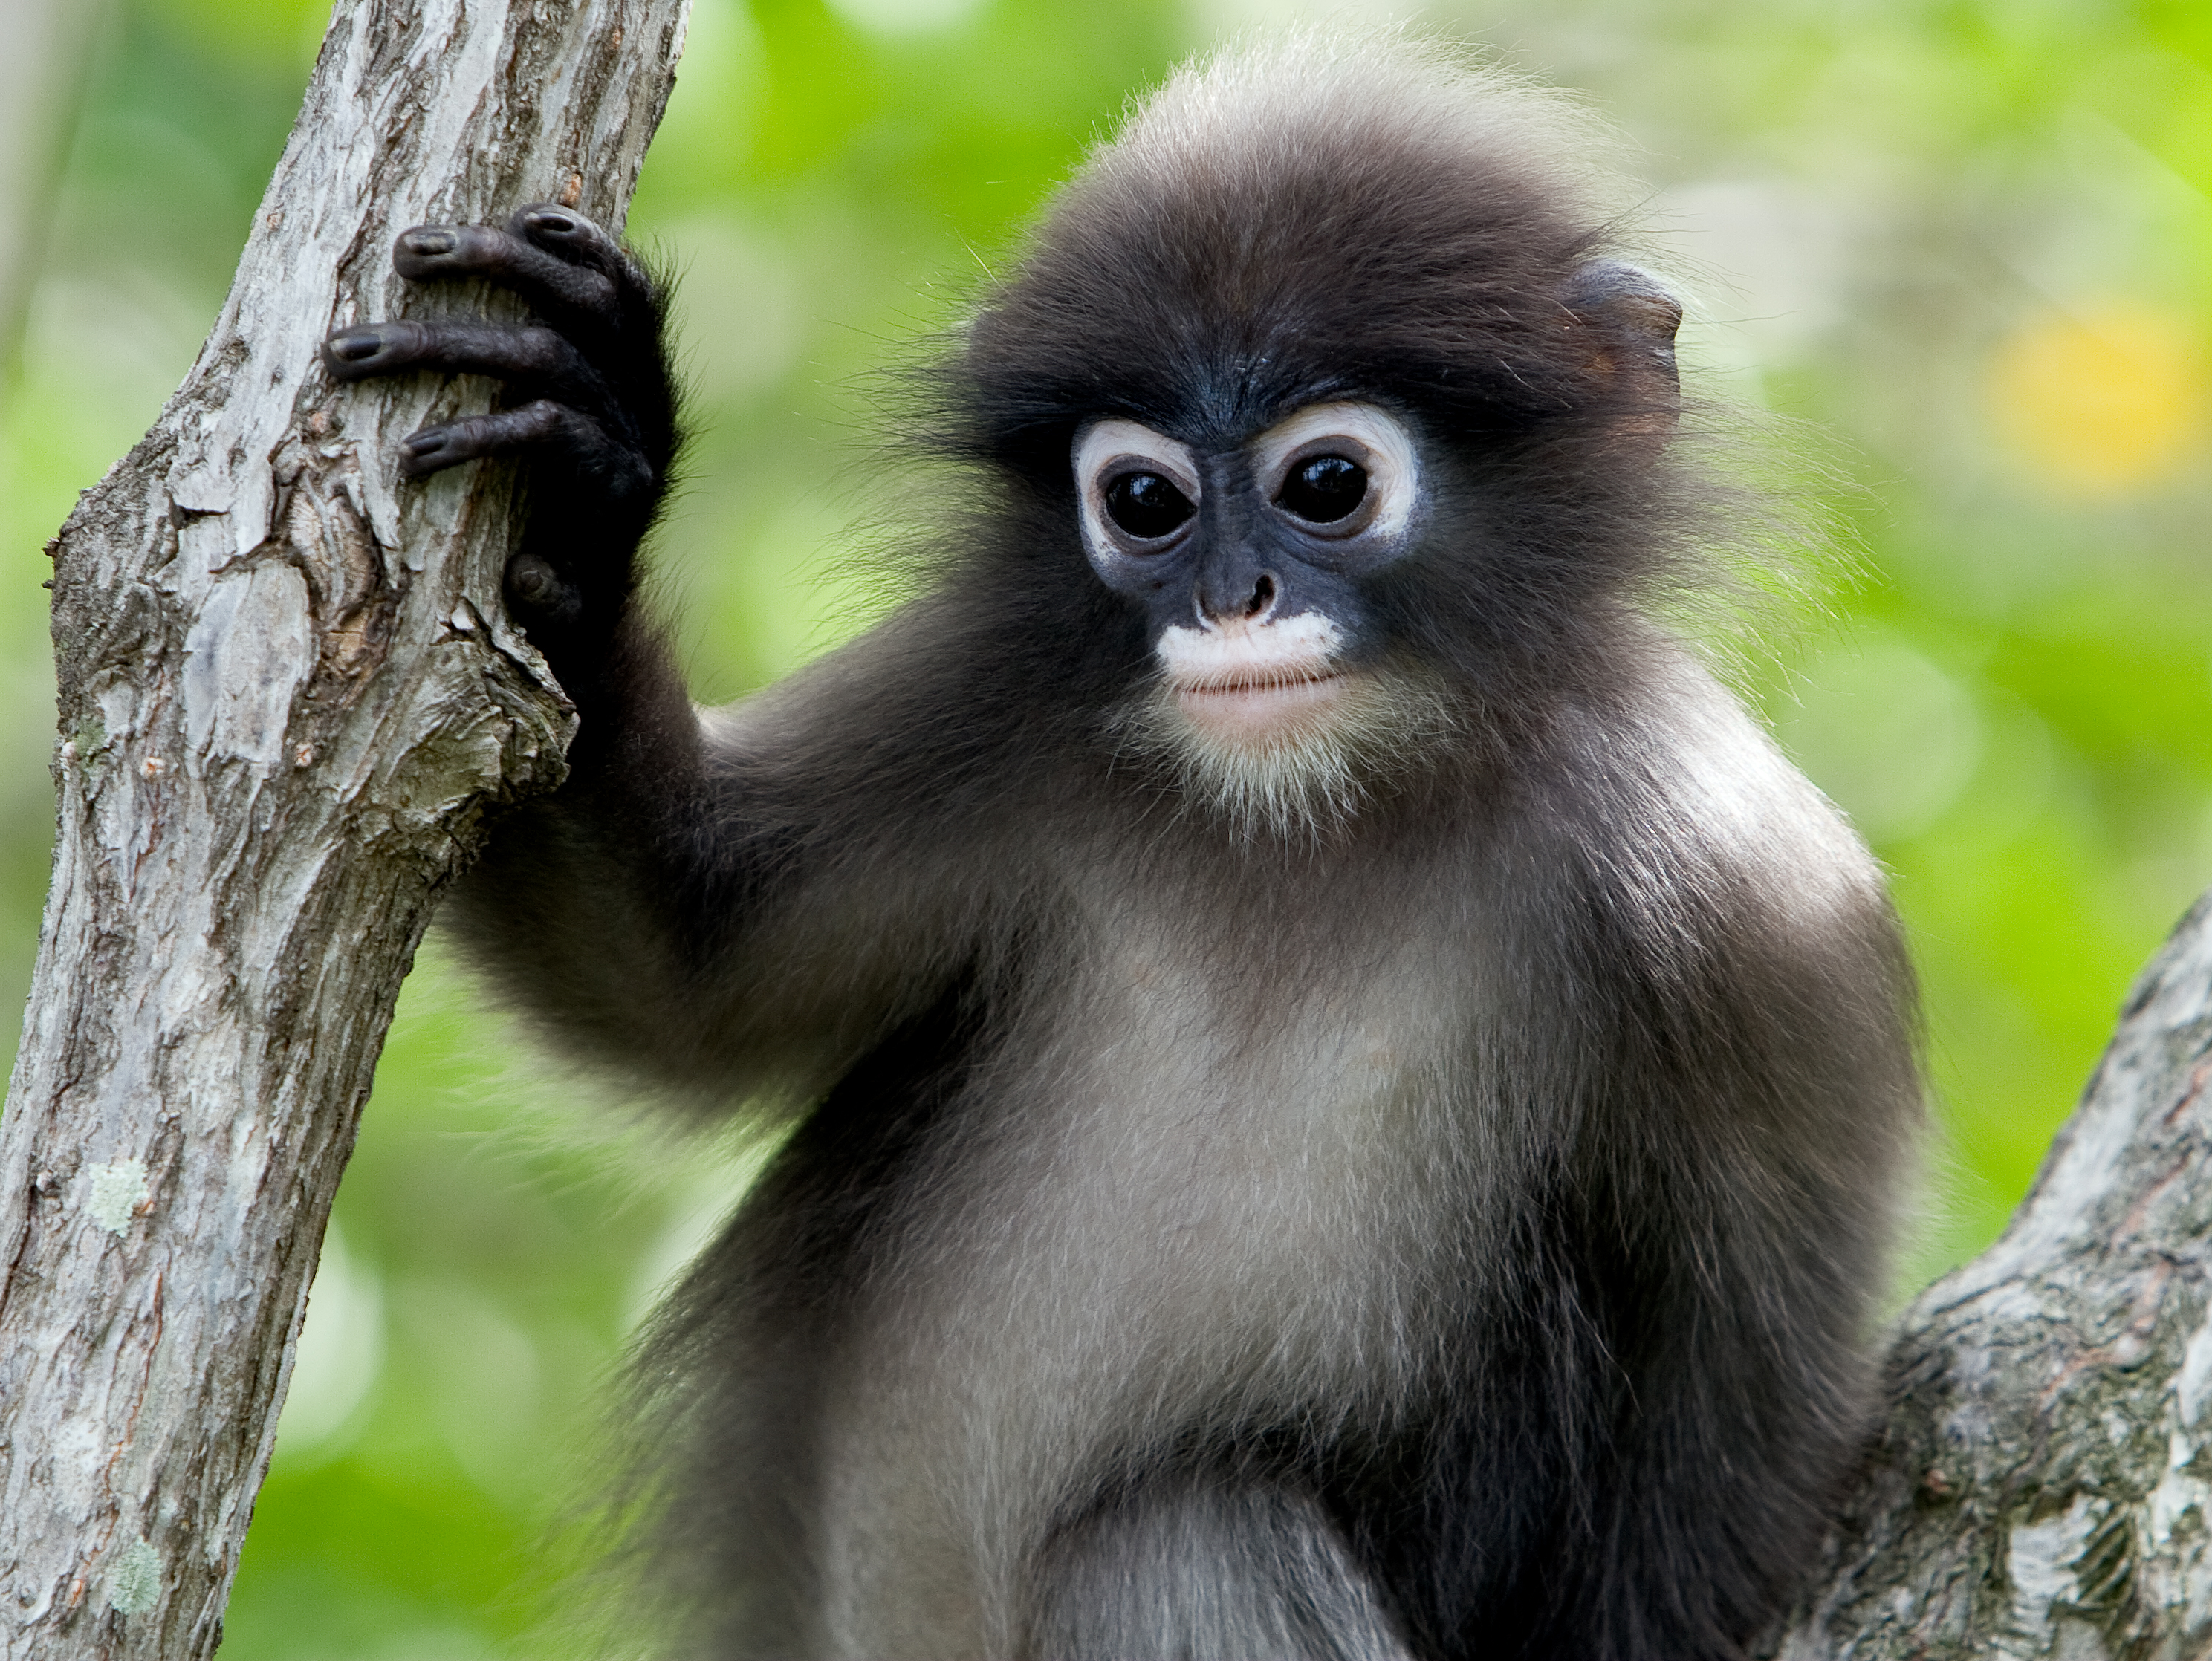 Dusky Leaf Monkey (Trachypithecus obscurus), about animals